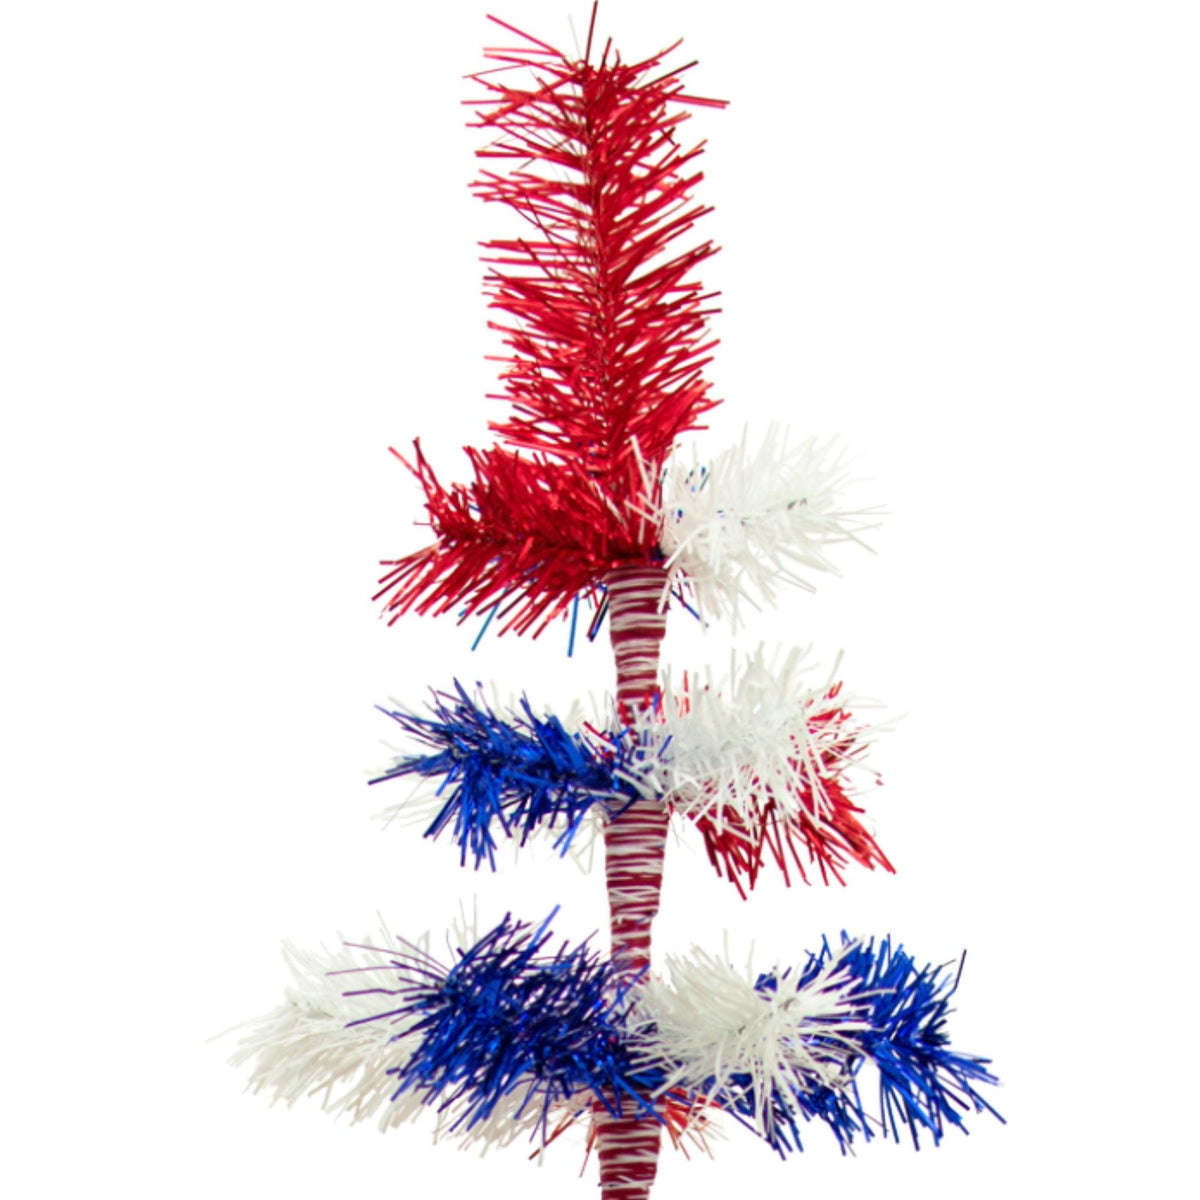 Top of the 48in Tall Red White and Blue Mixed Tinsel Christmas Tree on sale at leedisplay.com.